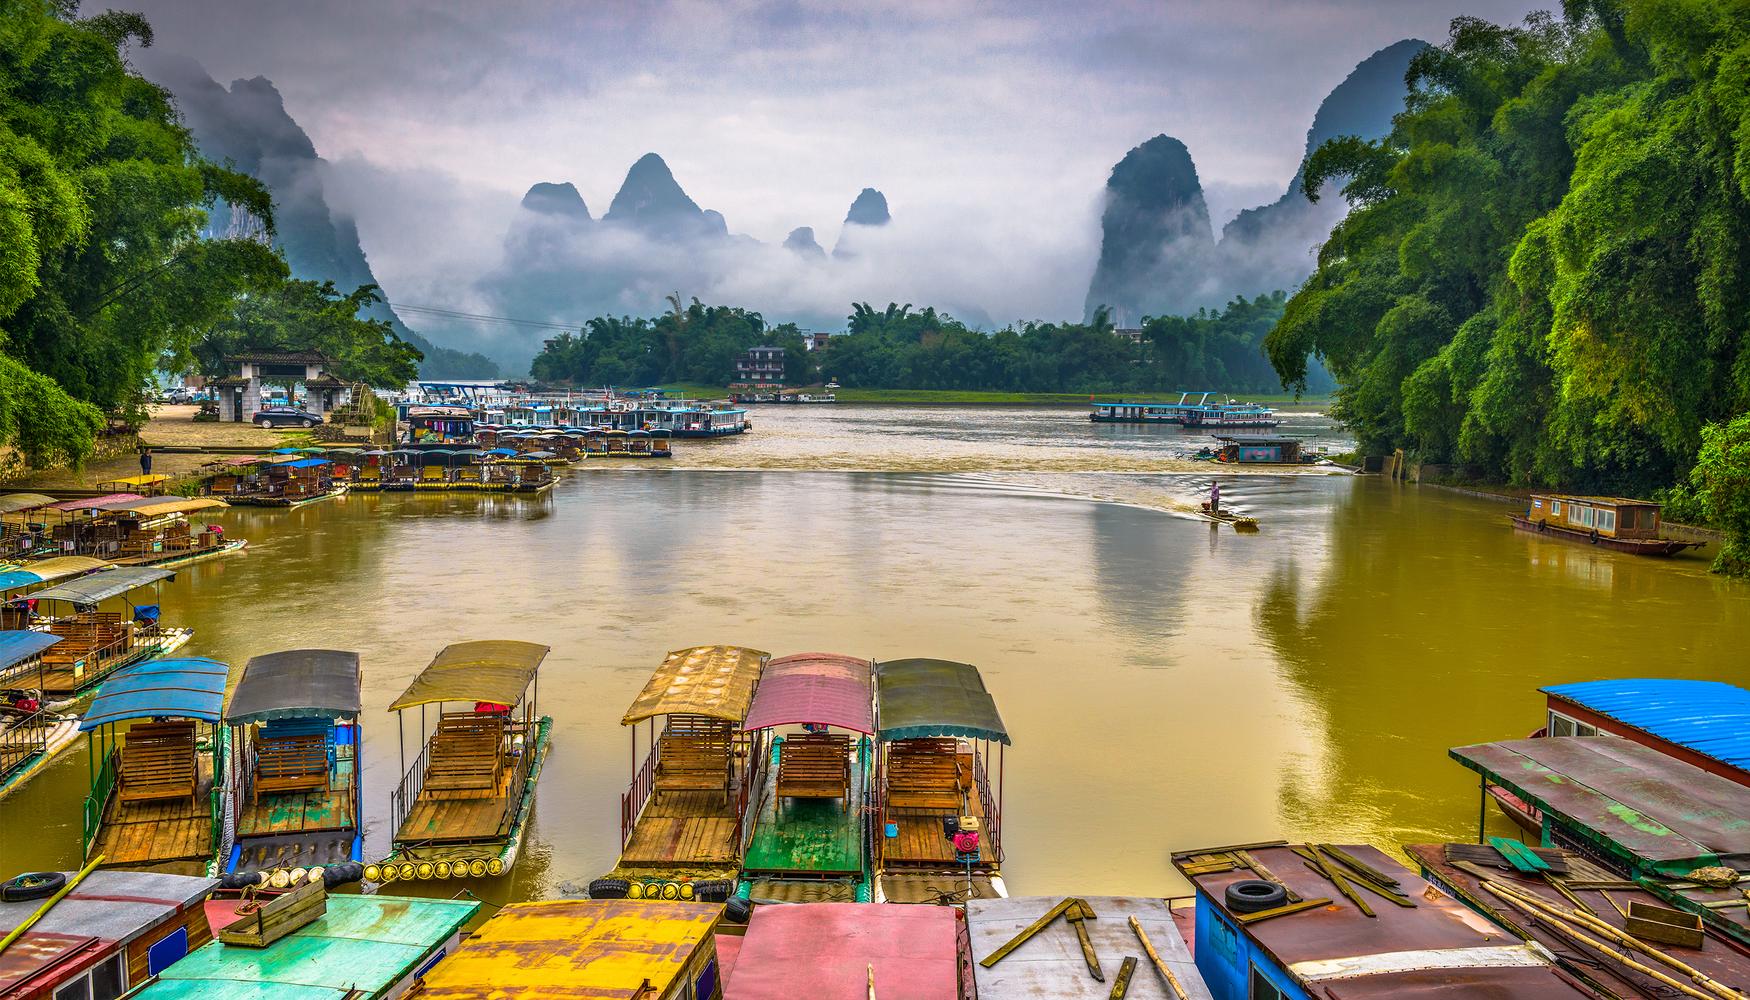 guilin trip cost